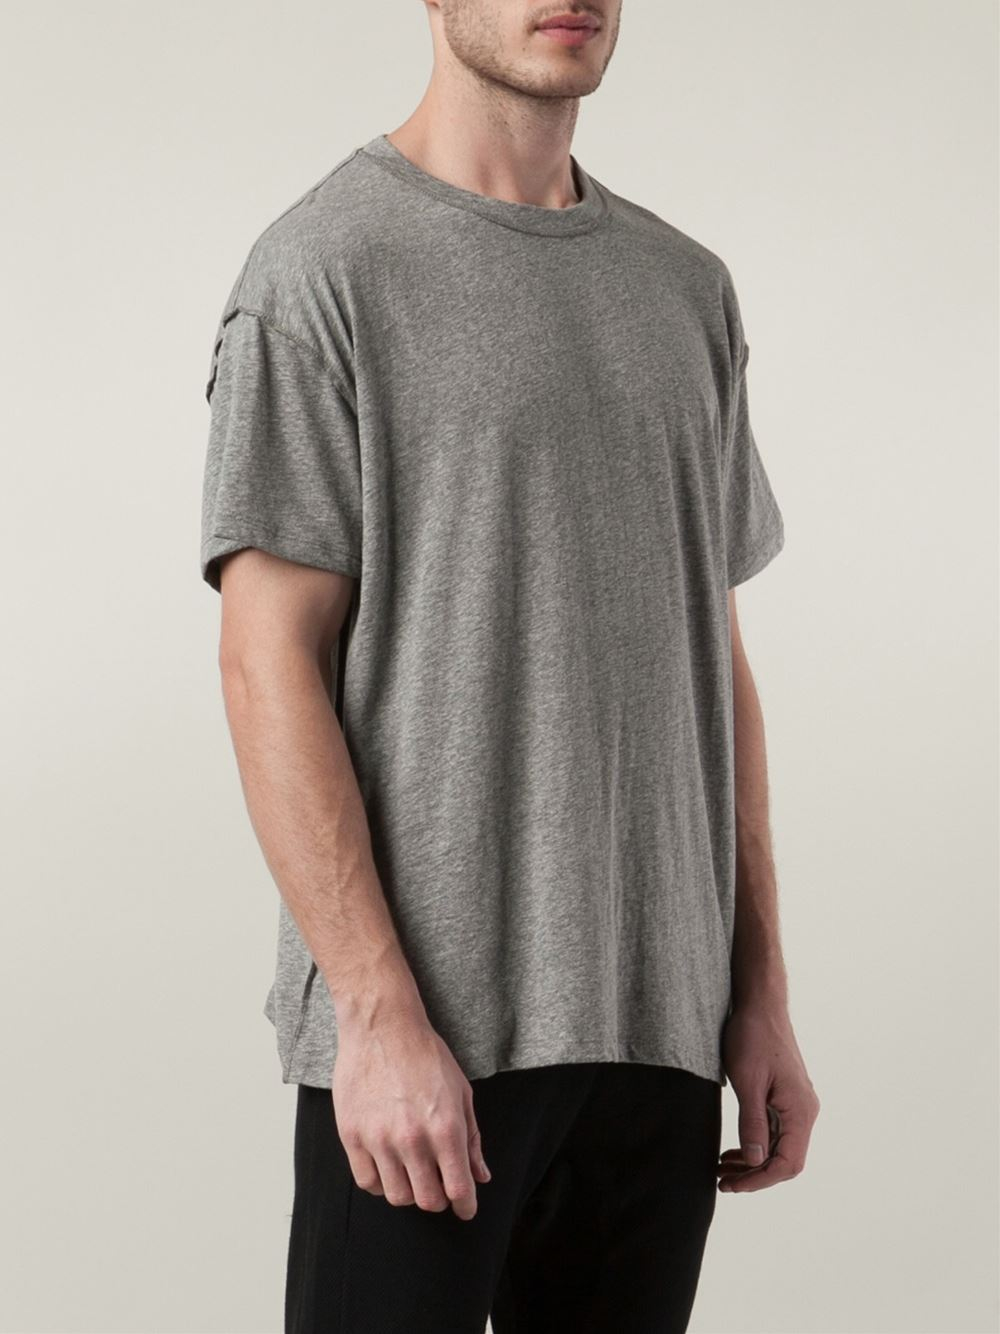 Lyst - Fear Of God Crew Neck T-Shirt in Gray for Men